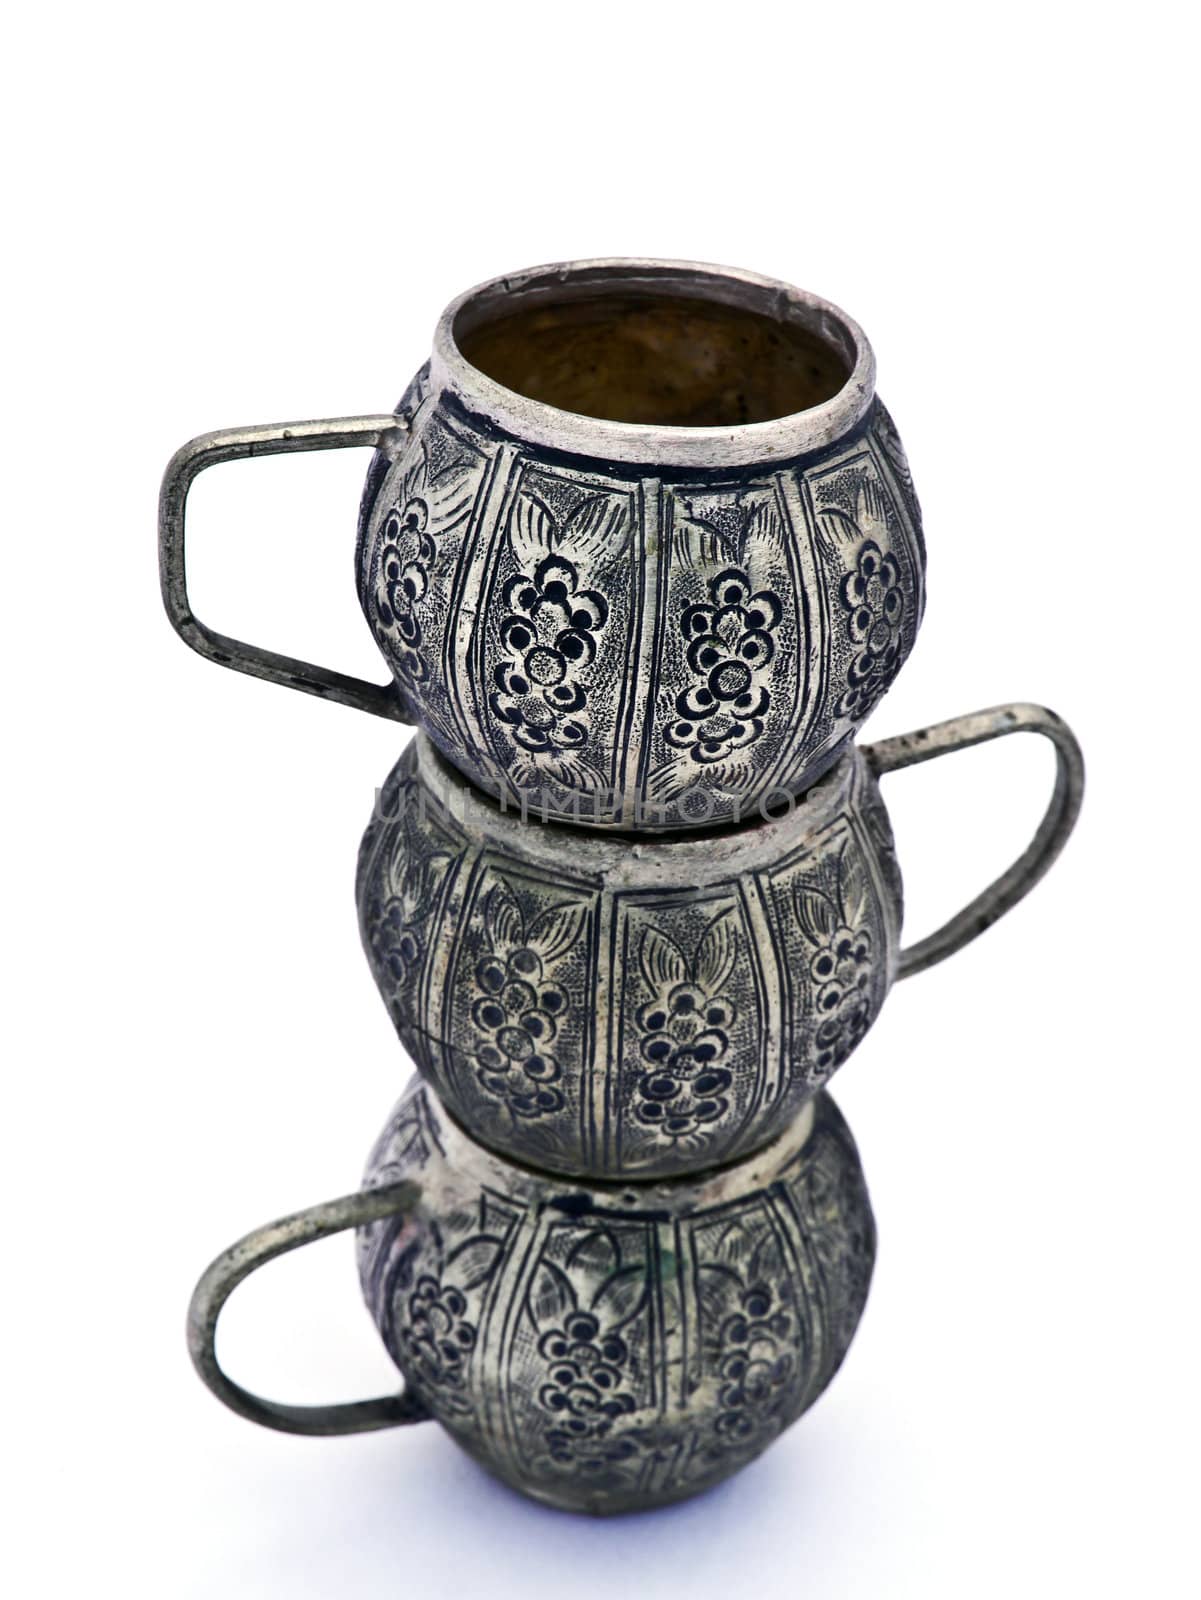 Antique tea pot and cups made ​​of metal, isolated on a whit by Noppharat_th